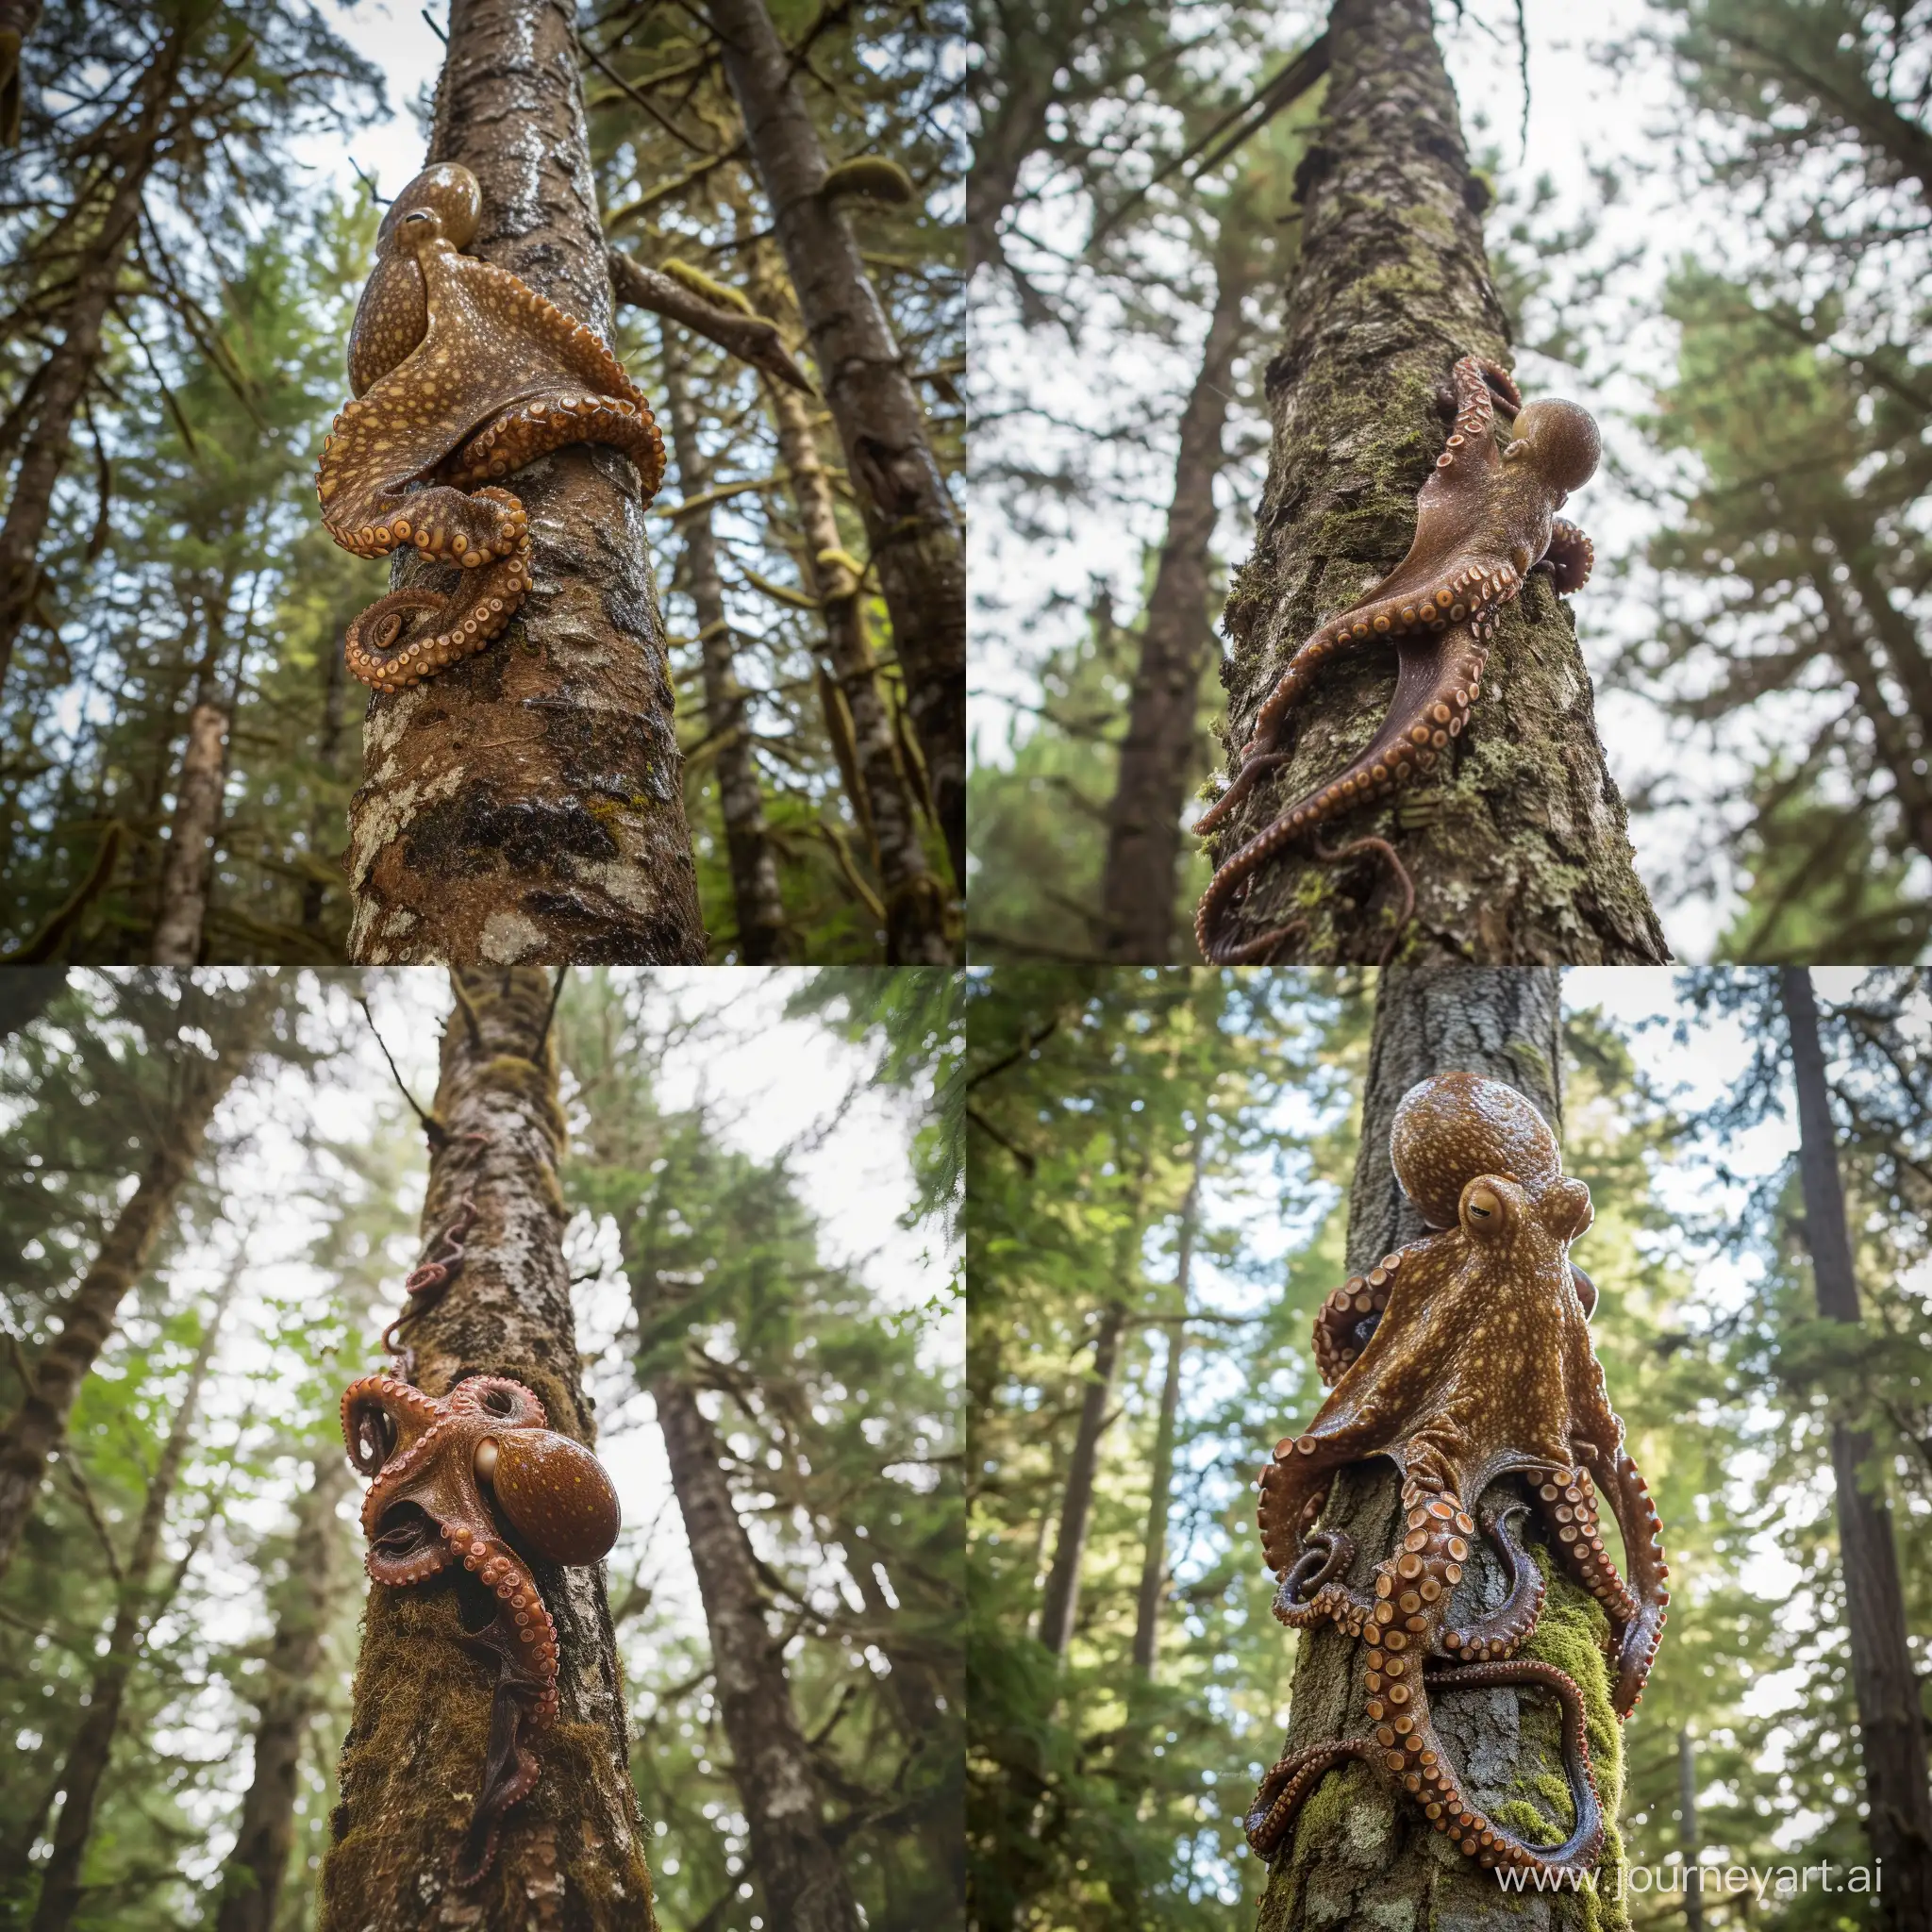 vibrant clear crisp wildlife photo of a wet slimy medium sized mottled brown octopus scaling a tall pine tree, body wrapped around the tree, old growth pine forest. temperate pine rainforest, bright daylight, telephoto lens, canon camera, wide shot, shot from below at ground level pointing up